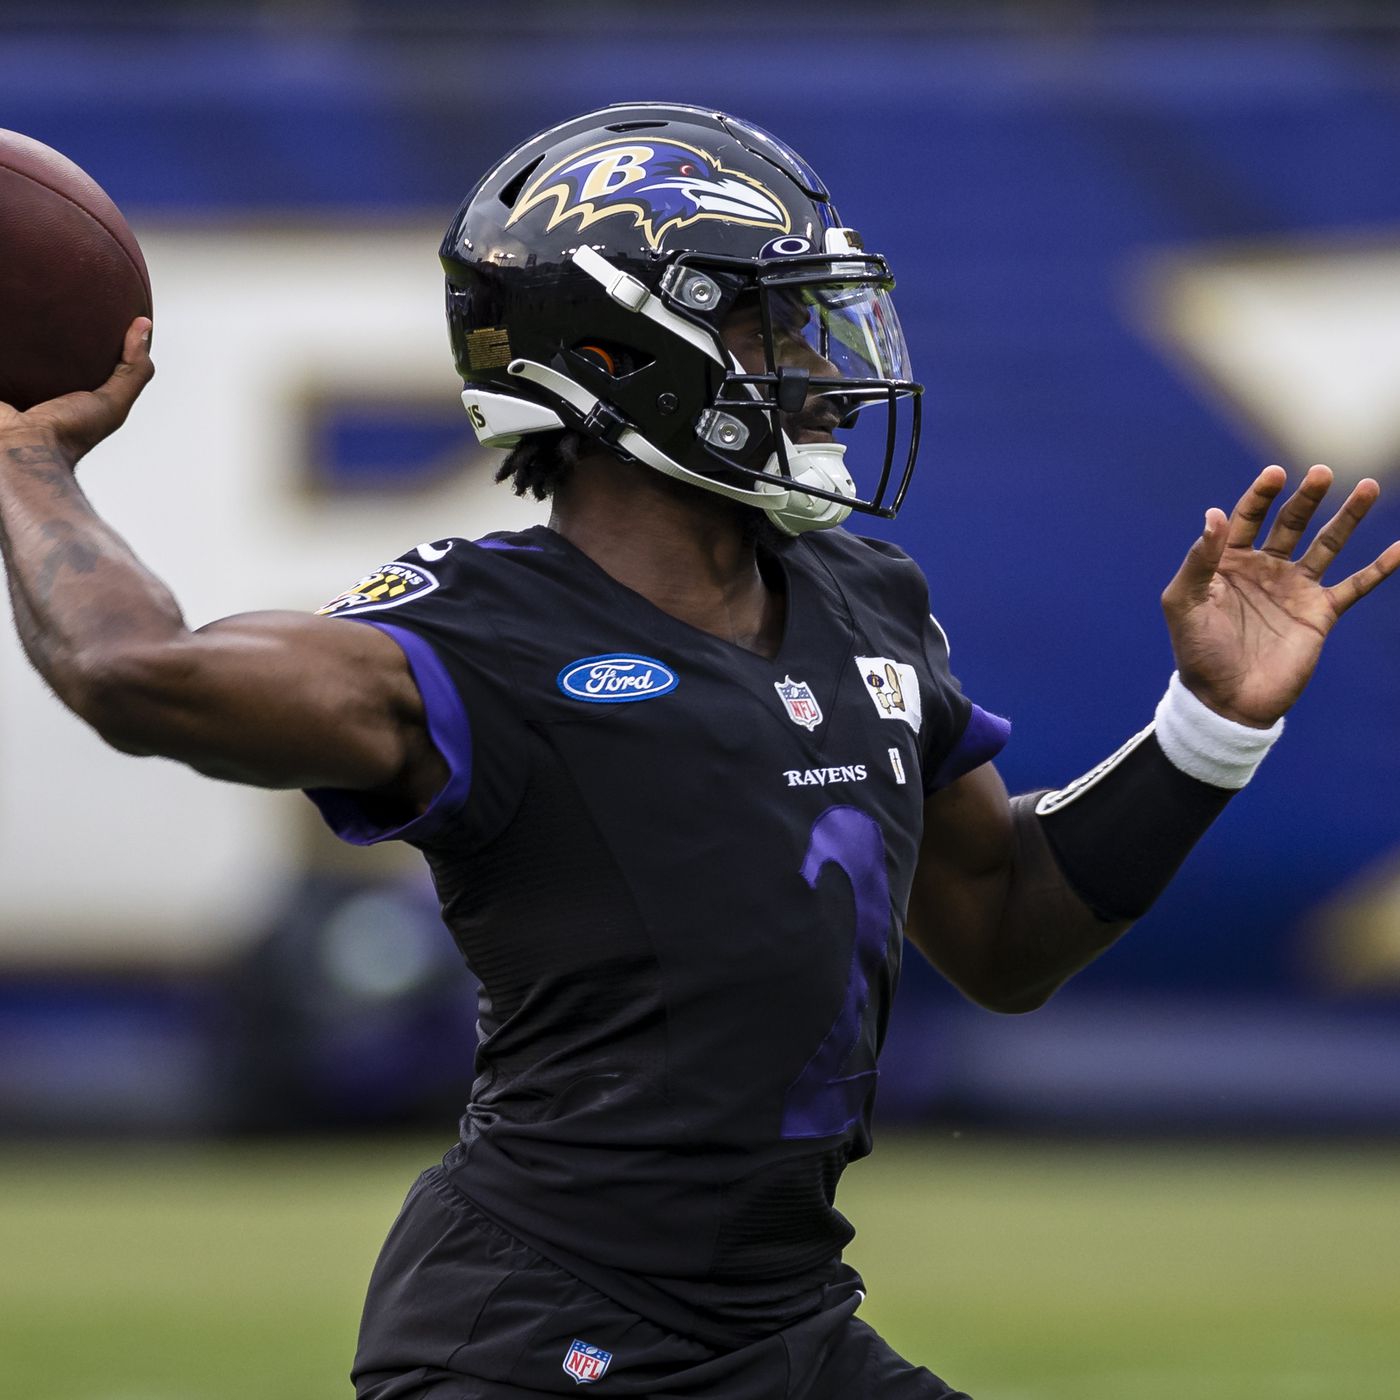 From Ravens PR: Ravens announce 17 open practices all free for